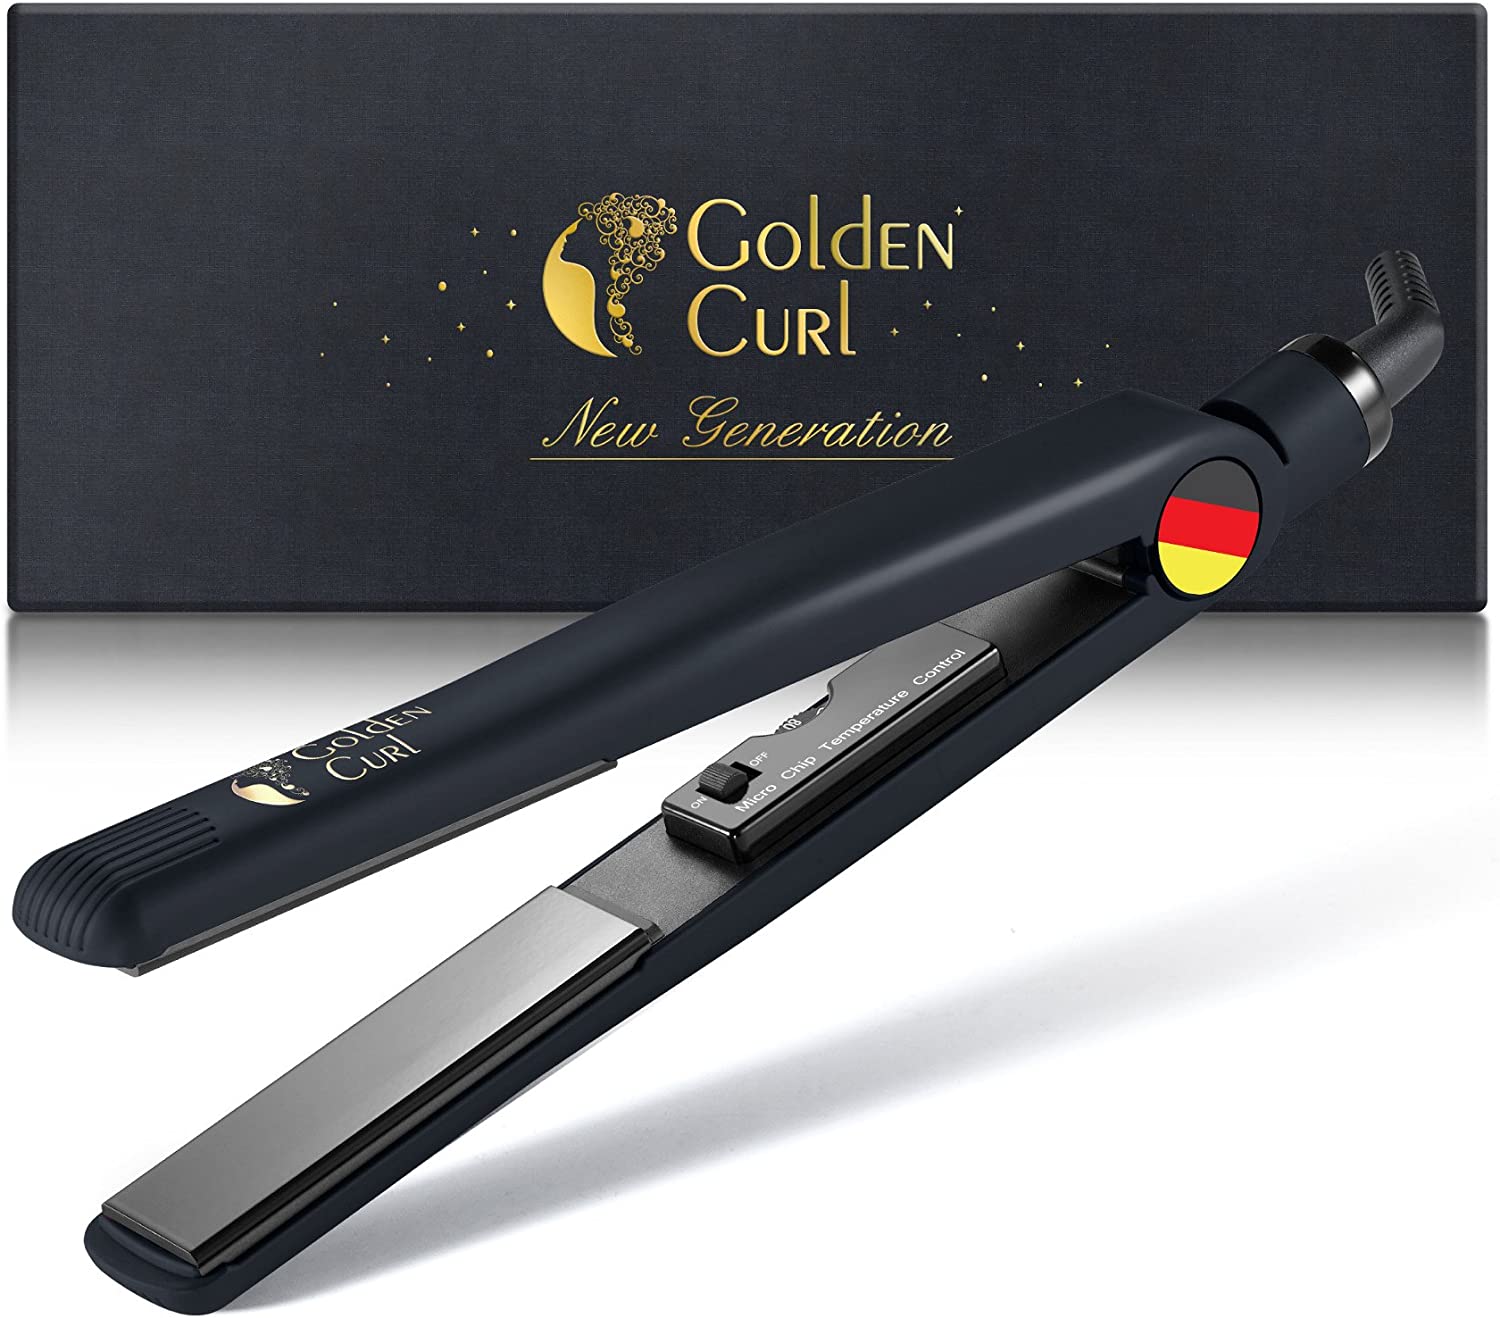 Golden Curl Straighteners for Curling and Straightening Hair Straighteners – Professional Hair Straightener, Hair Straightener Iron, black